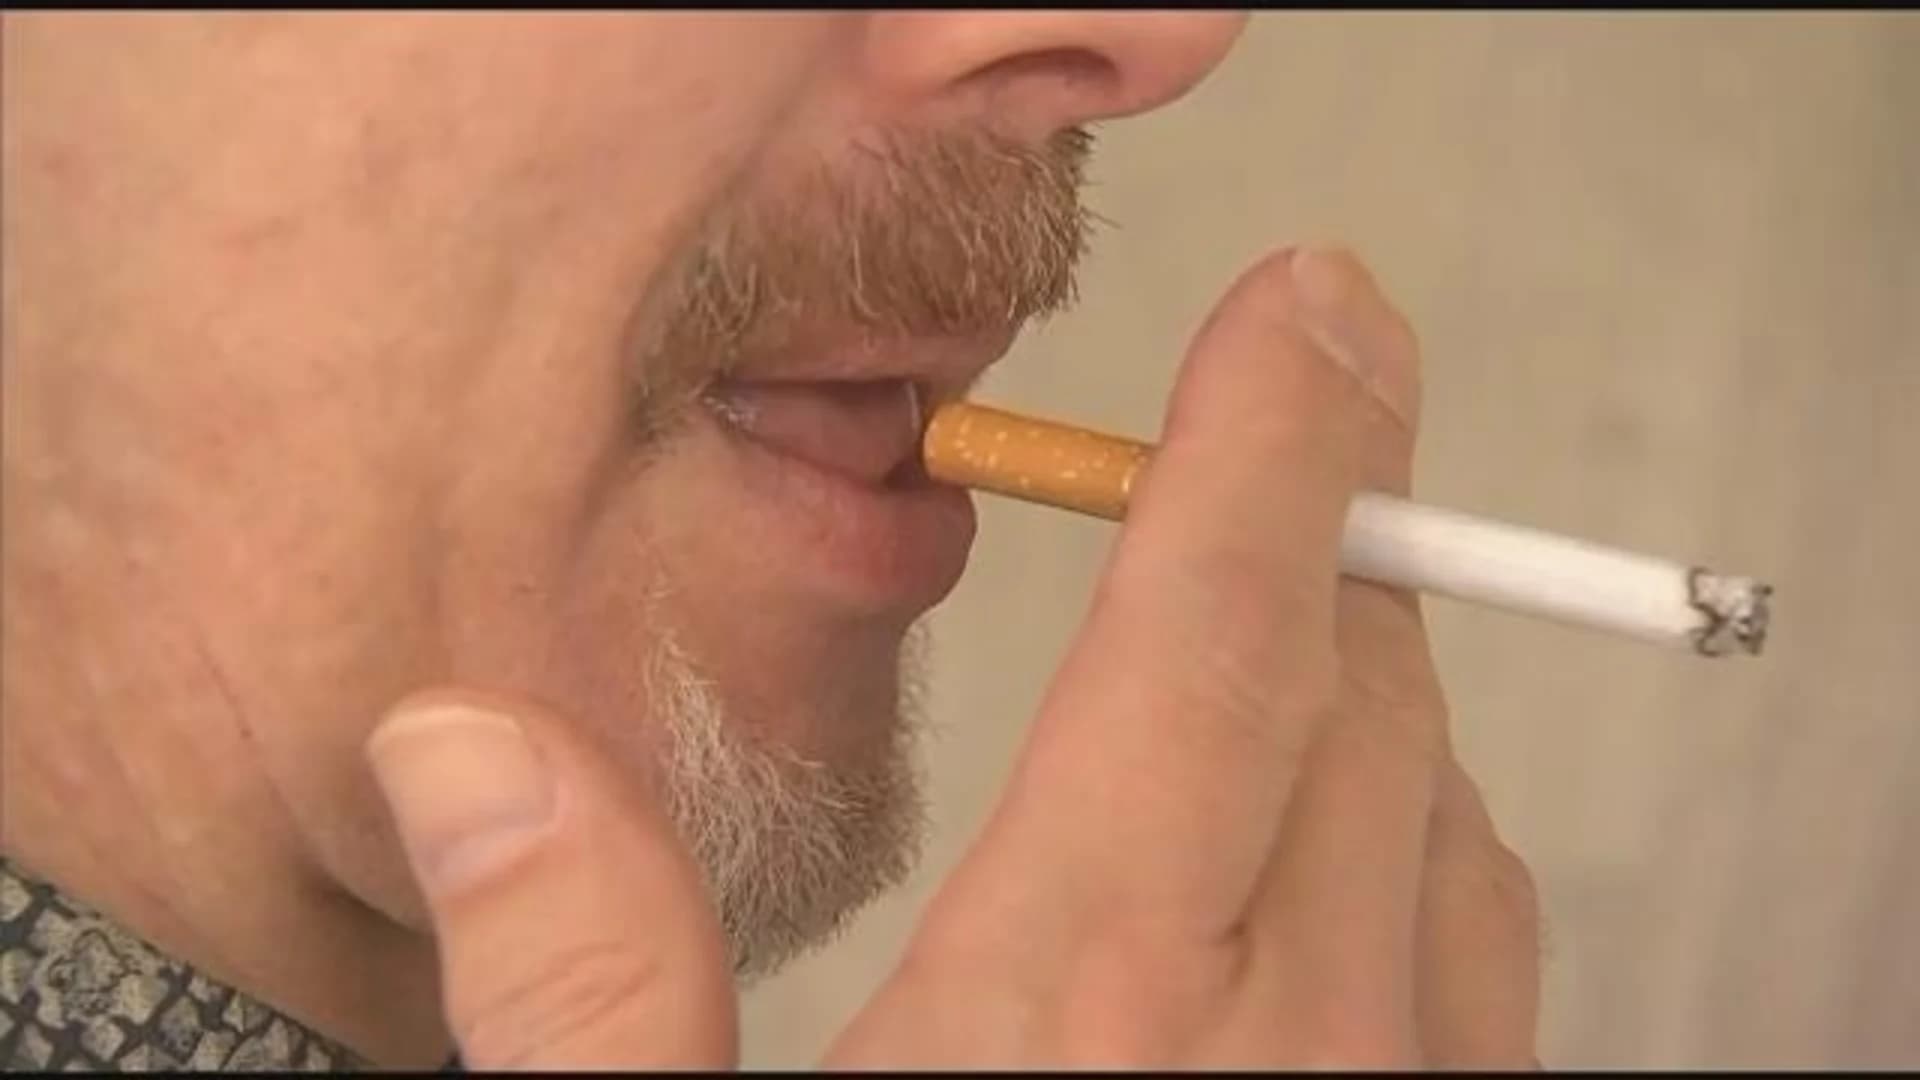 Ban on tobacco sales in city pharmacies goes into effect